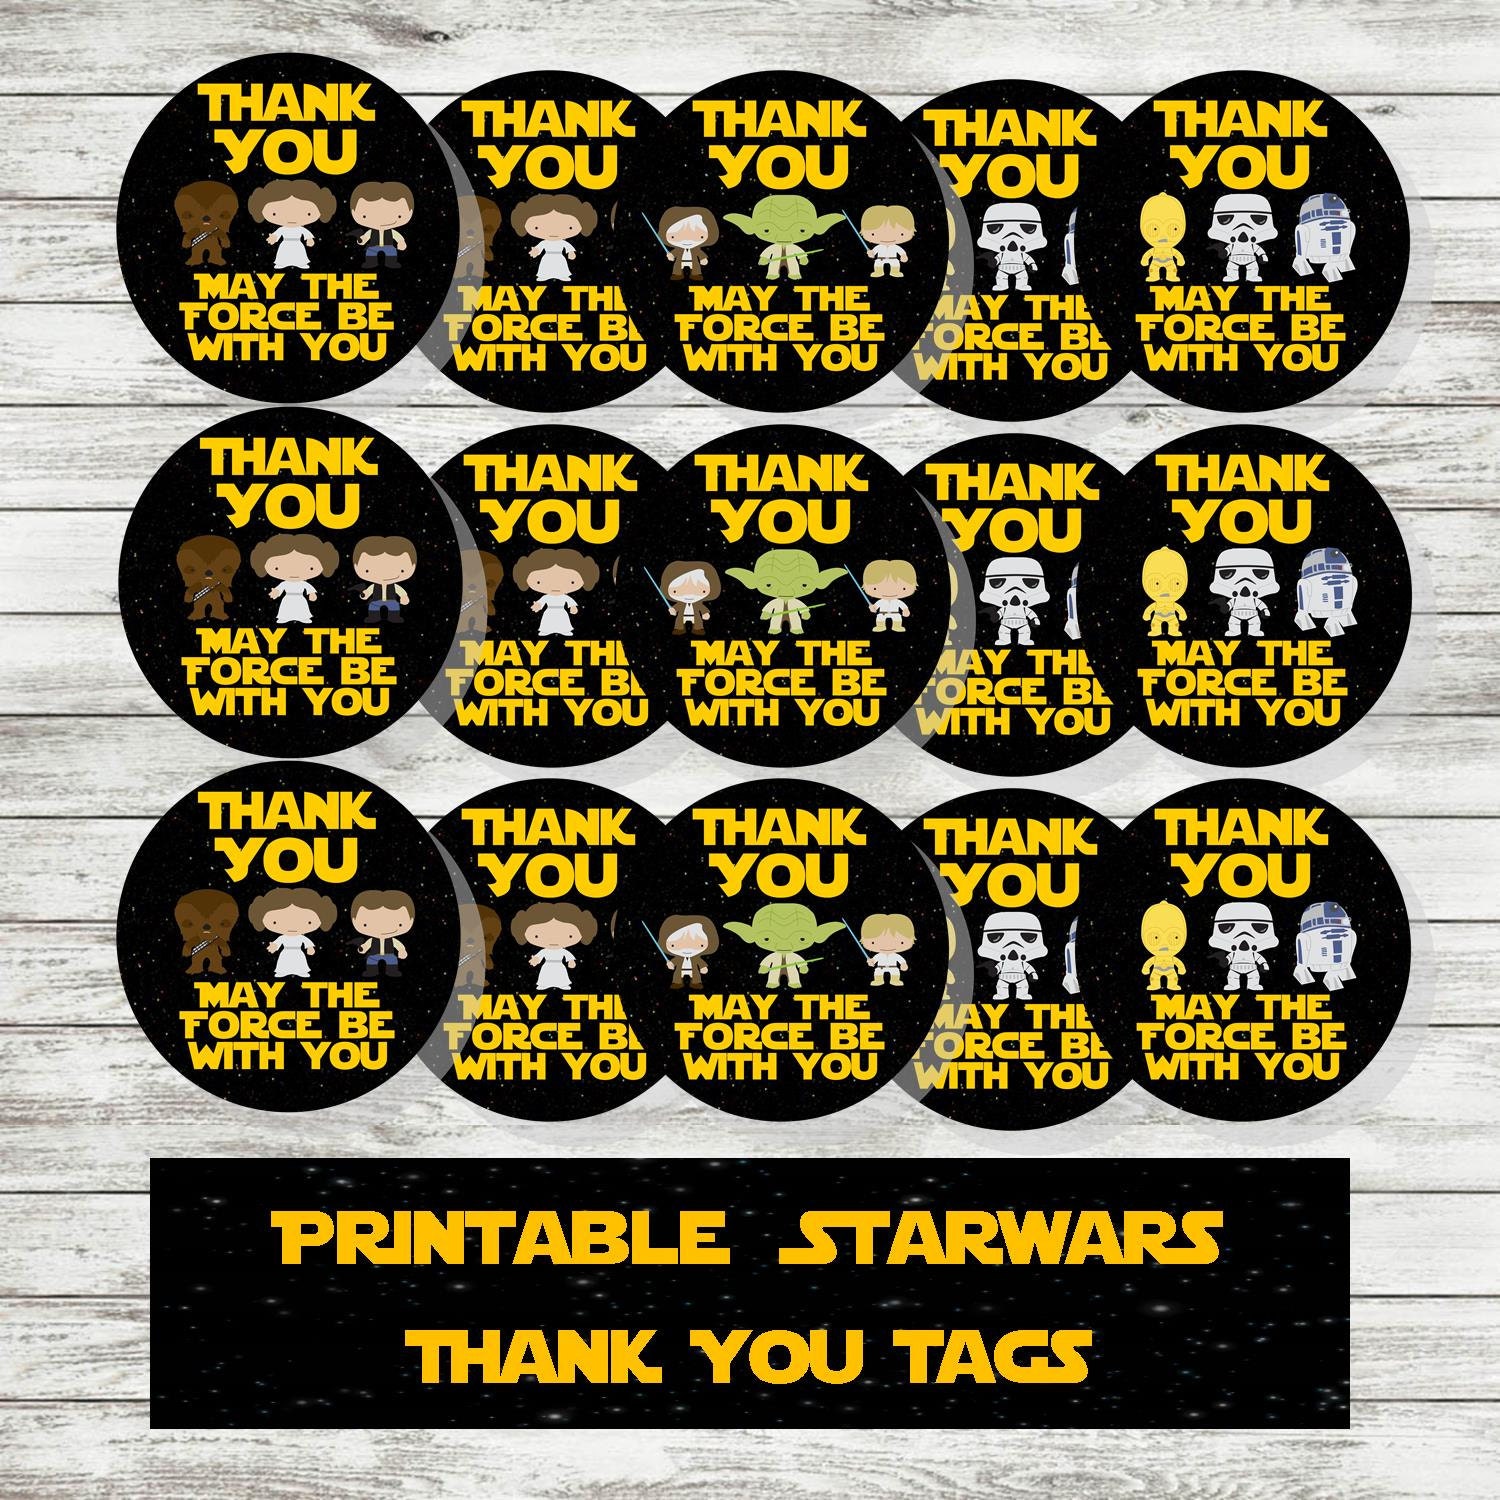 bb8-thank-you-note-star-wars-thank-you-card-printable-star